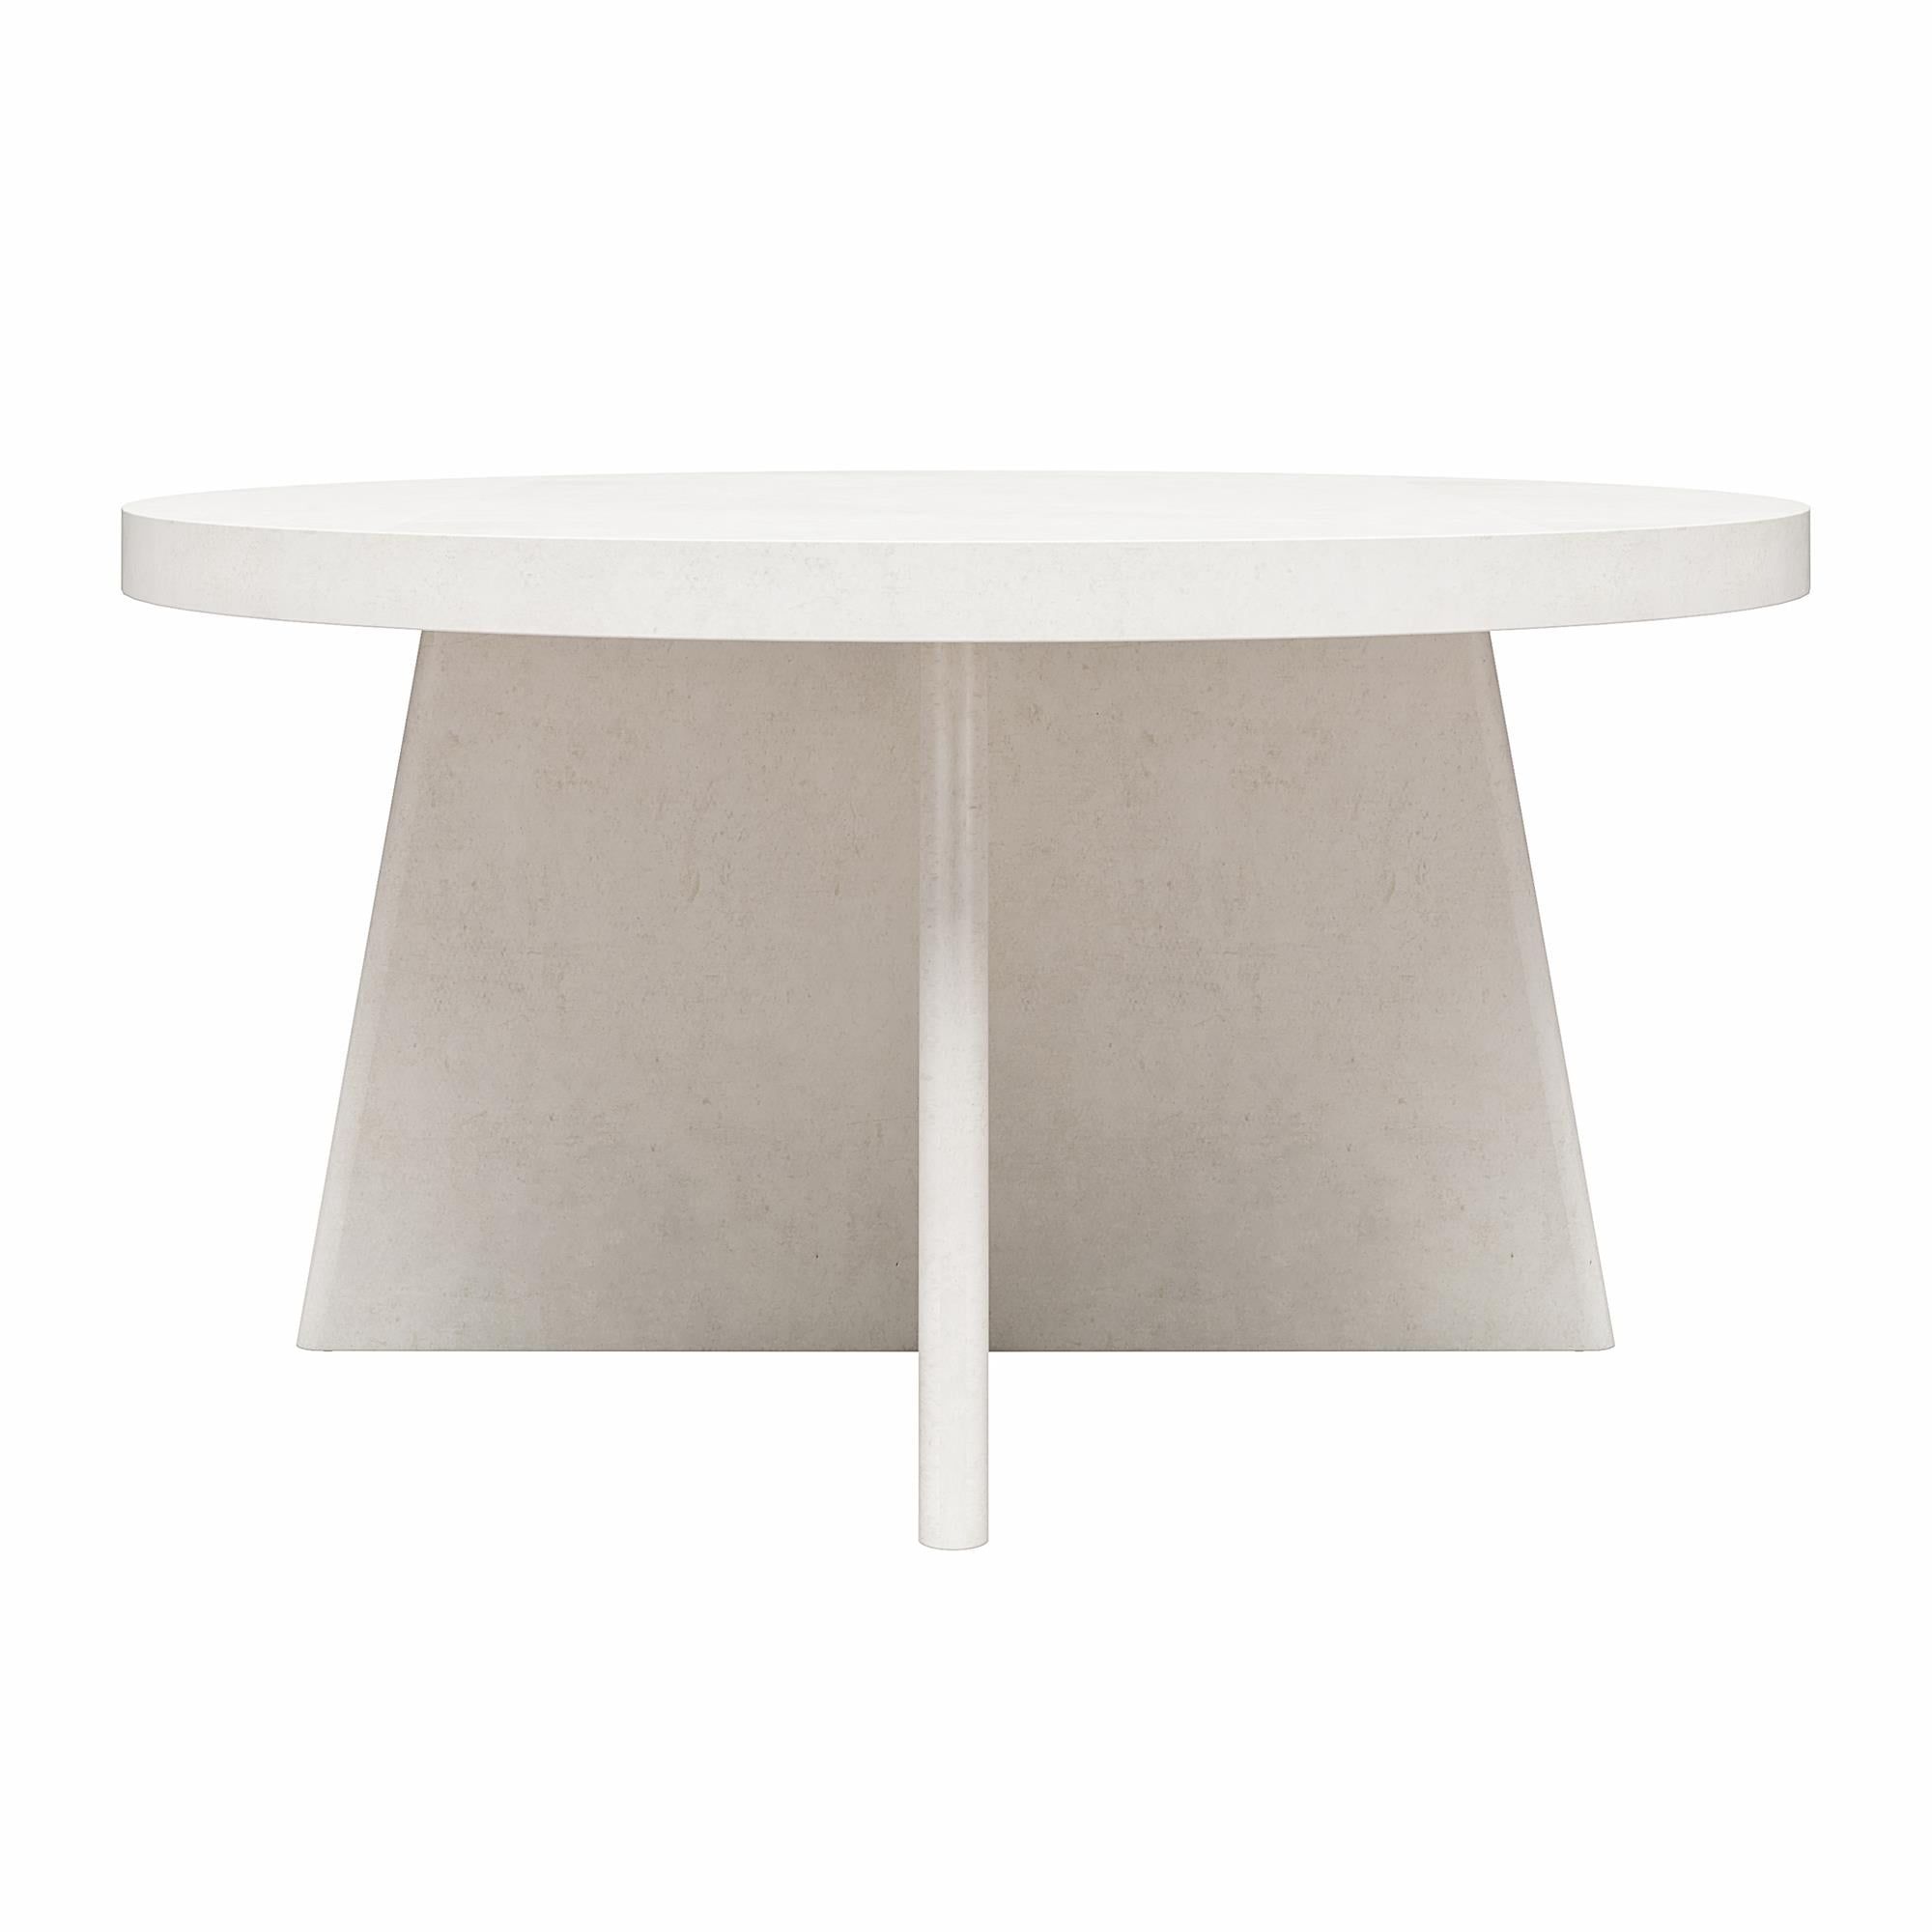 Queer Eye Liam Round Coffee Table, Plaster – Walmart Intended For Liam Round Plaster Coffee Tables (View 7 of 20)